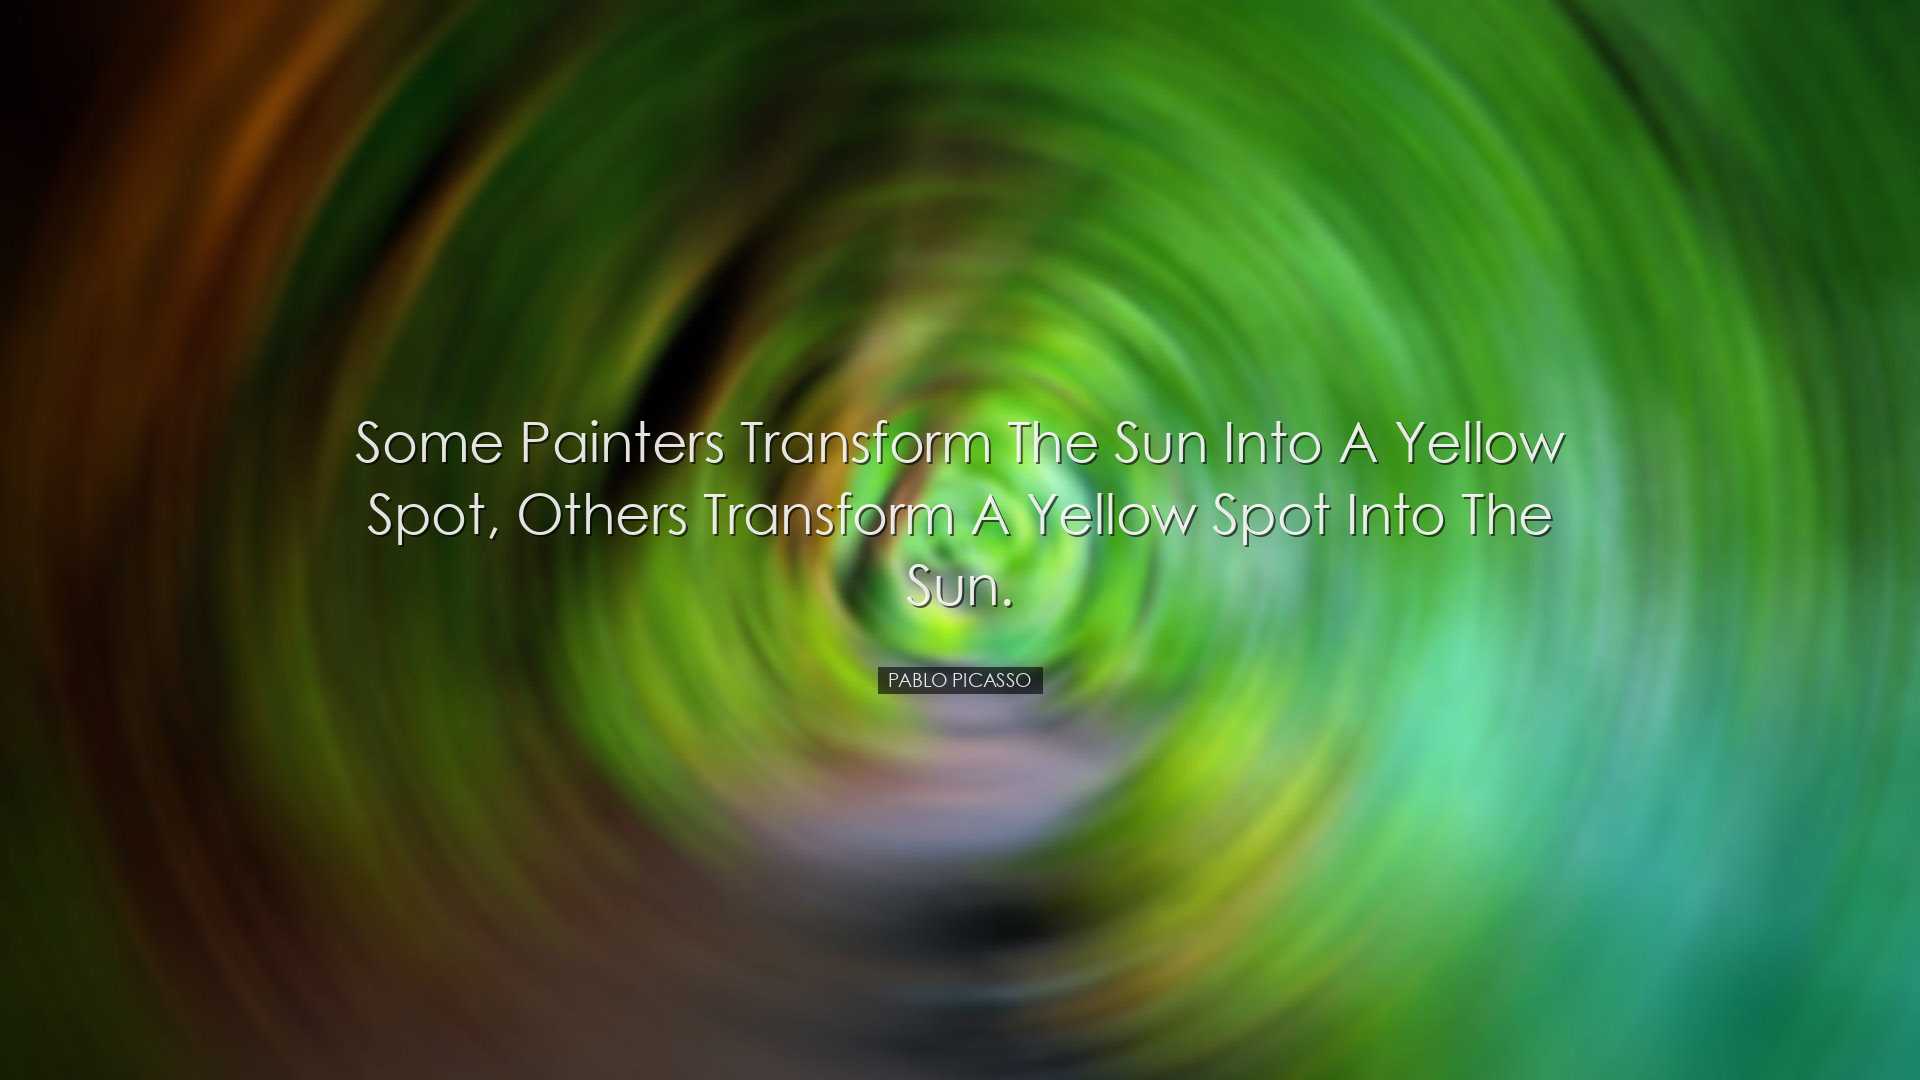 Some painters transform the sun into a yellow spot, others transfo